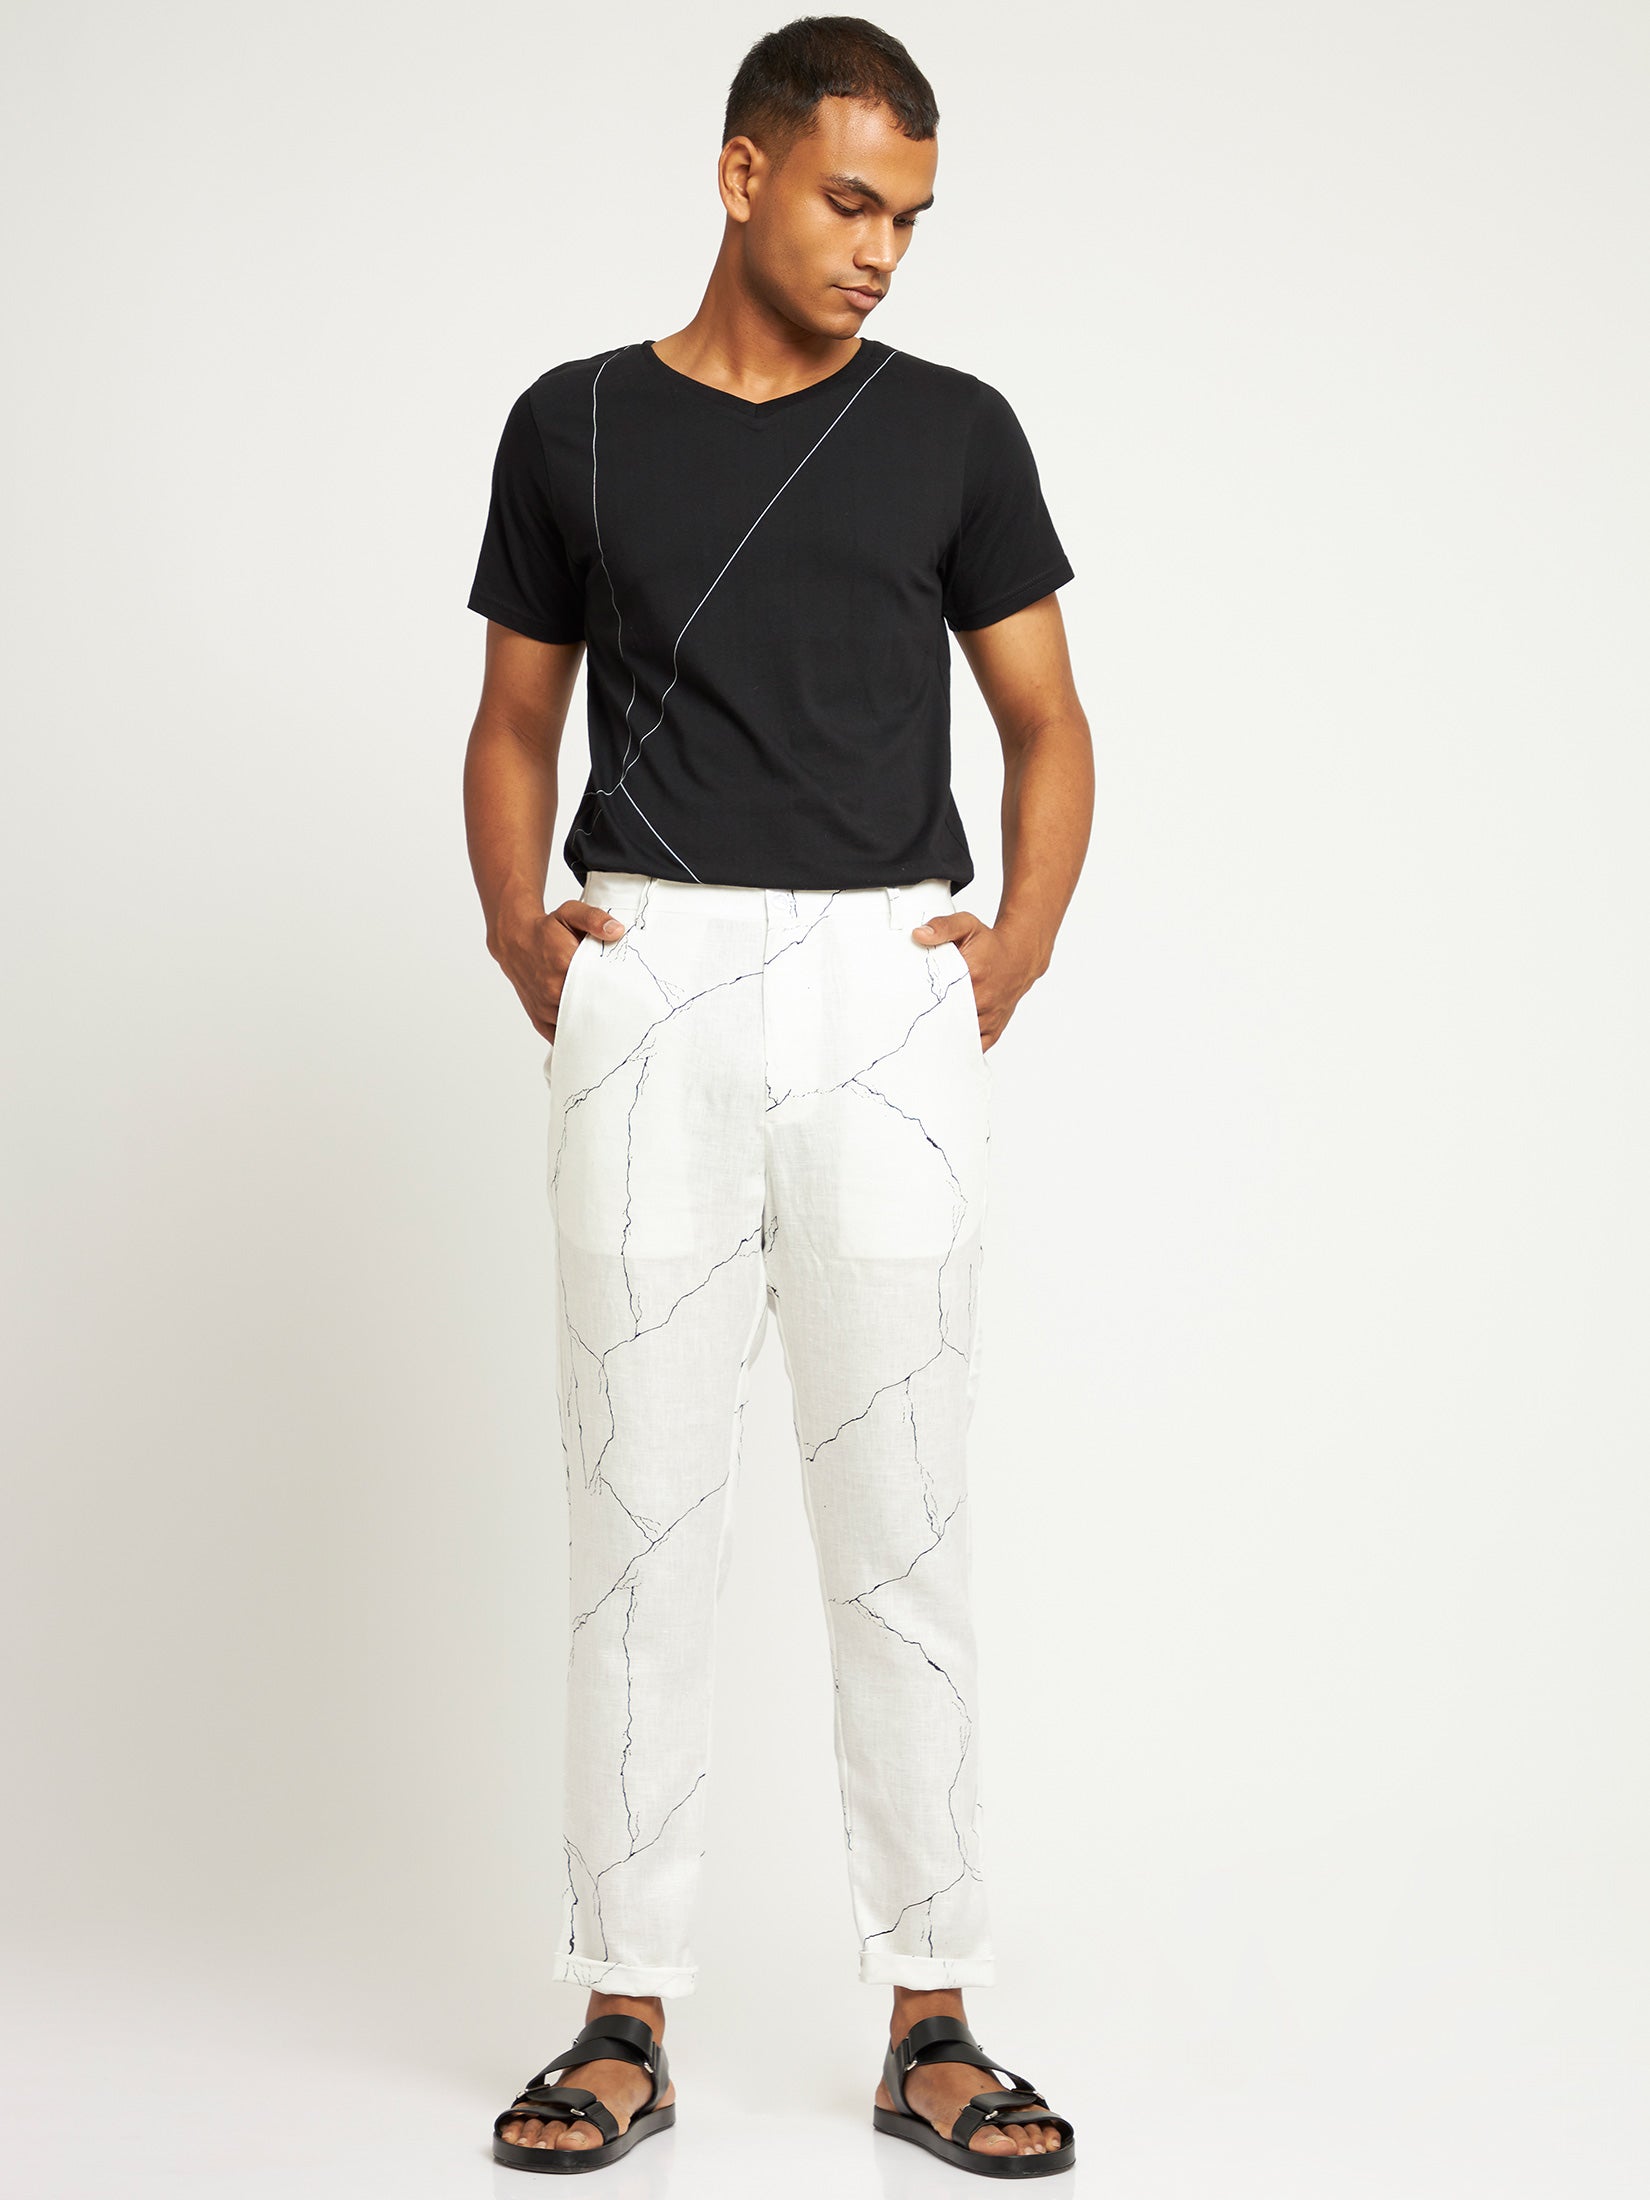 Toco - Trouser - Marble